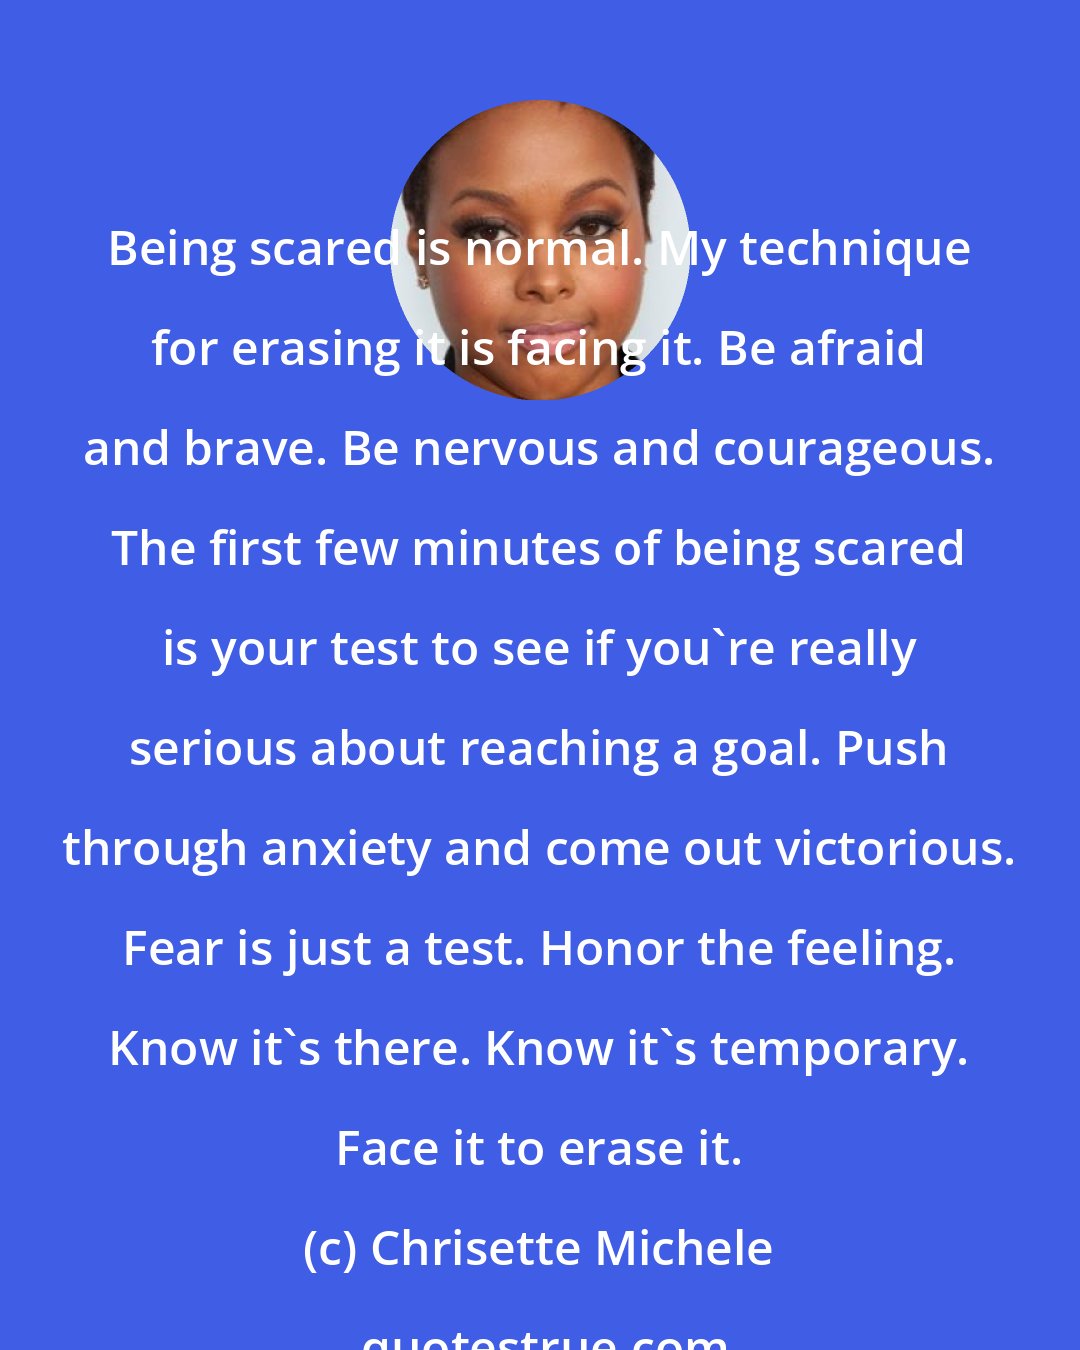 Chrisette Michele: Being scared is normal. My technique for erasing it is facing it. Be afraid and brave. Be nervous and courageous. The first few minutes of being scared is your test to see if you're really serious about reaching a goal. Push through anxiety and come out victorious. Fear is just a test. Honor the feeling. Know it's there. Know it's temporary. Face it to erase it.